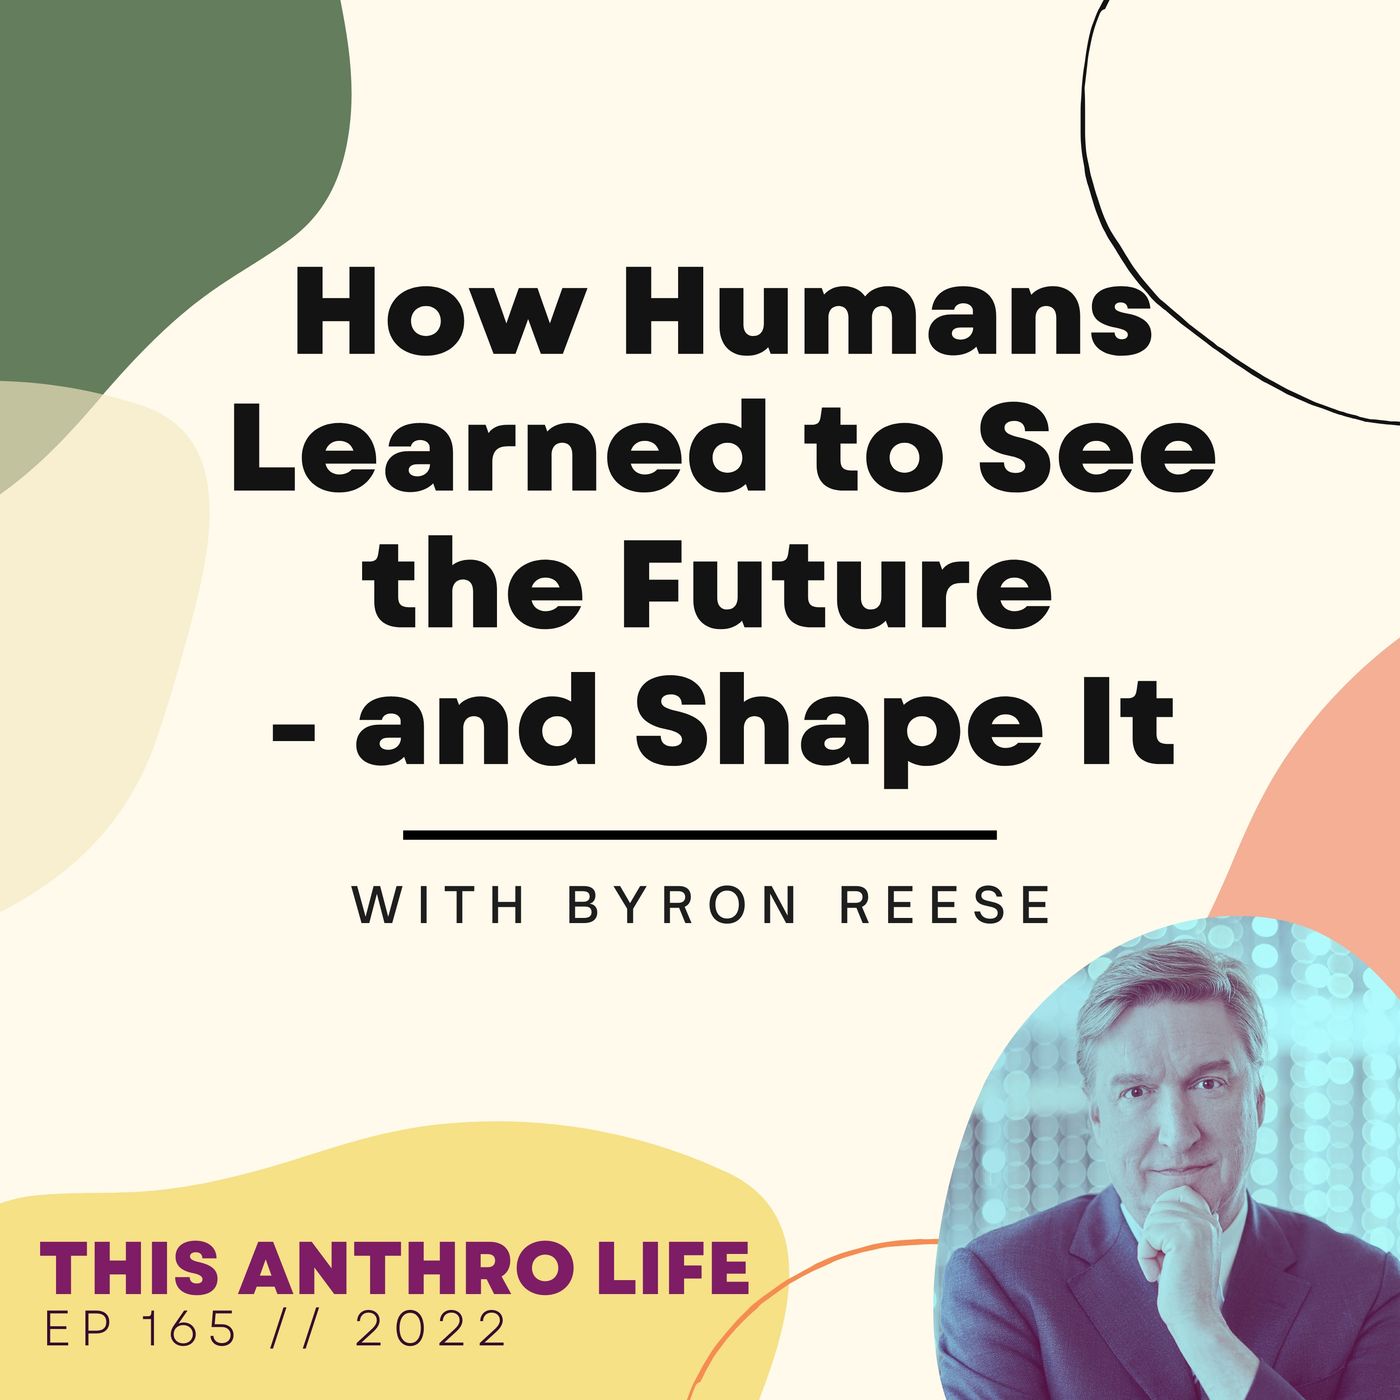 How Humans Learned to See the Future with Byron Reese